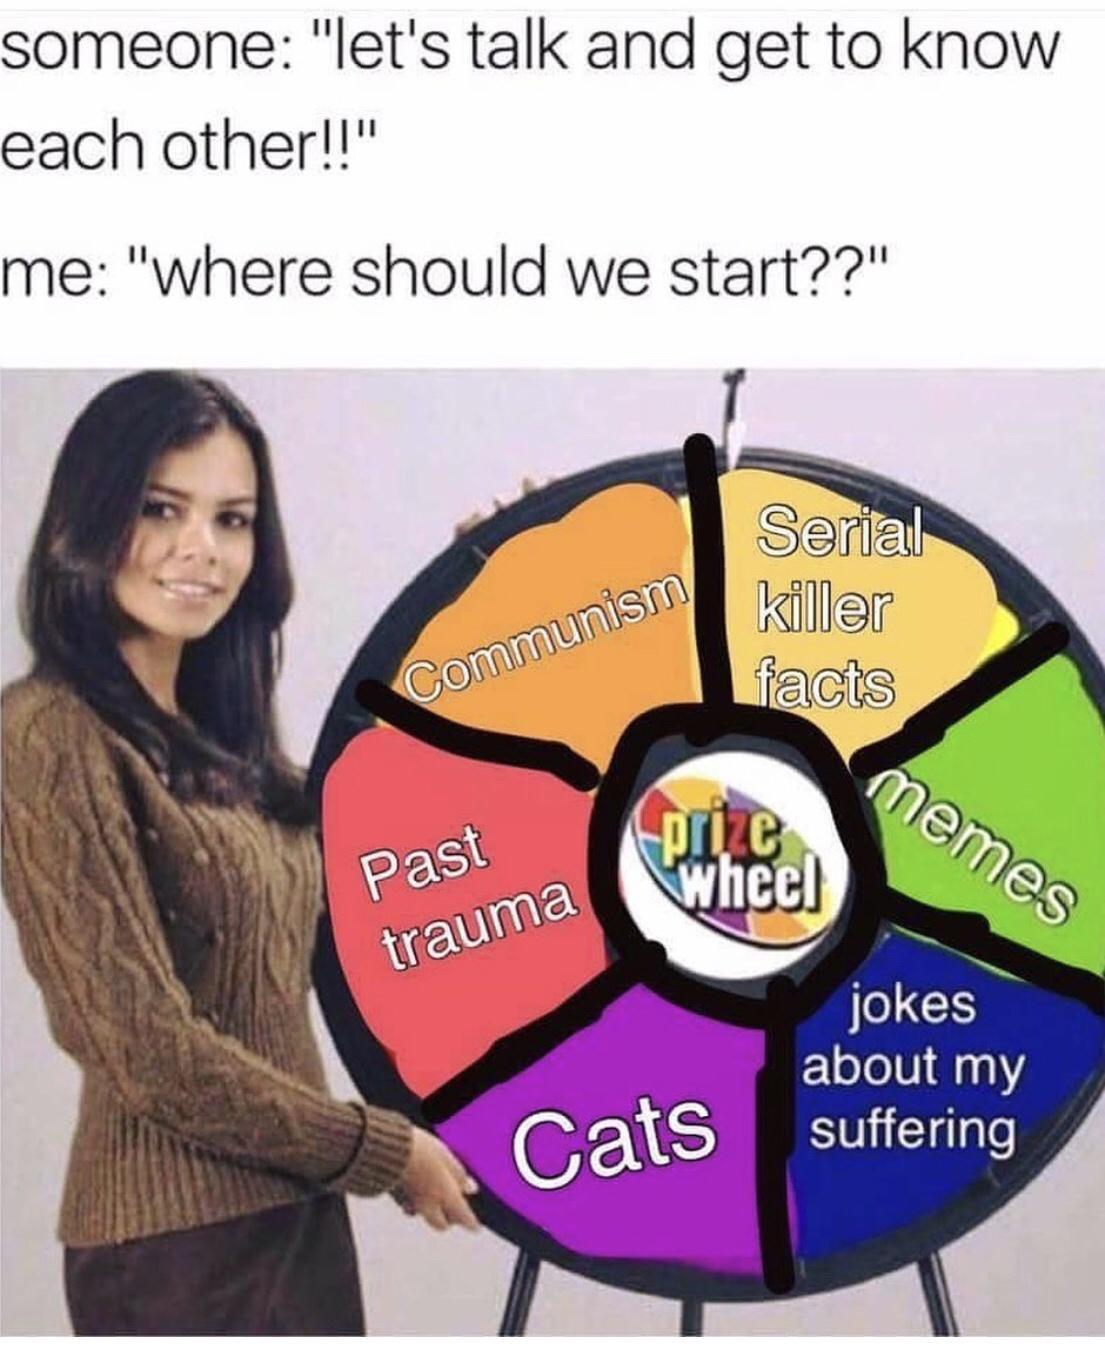 academic decathlon memes - someone "let's talk and get to know each other!!" me "where should we start??" Serial killer facts Communism memes Past trauma prize wheel jokes about my Cats suffering